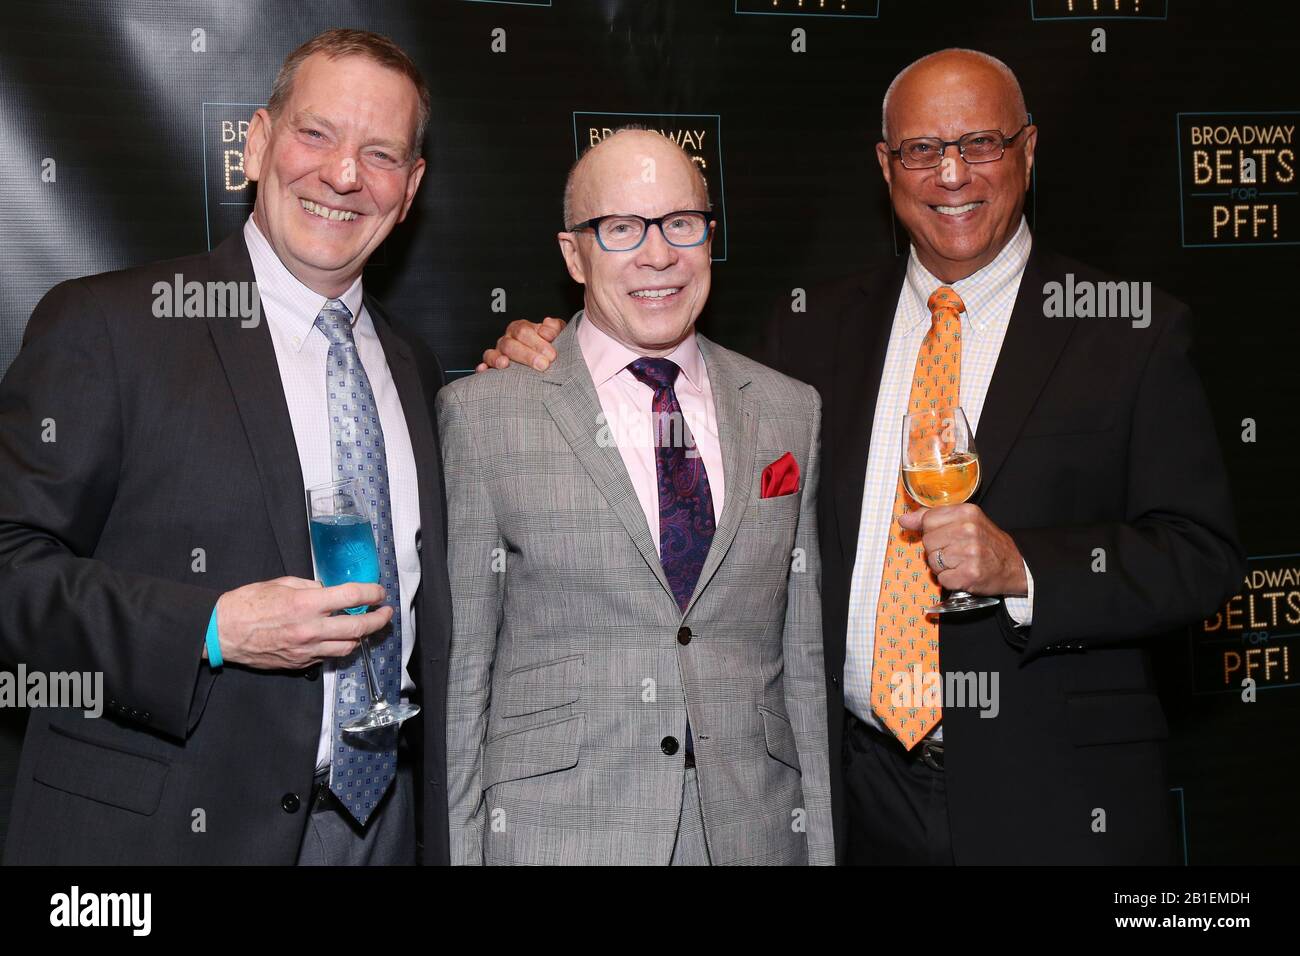 New York, NY, USA. 24th Feb, 2020. Guest, Bill Hutton, and Barry Brown at Broadway Belts for PFF! at the Edison Ballroom in New York City on February 24, 2020. Credit: Joe Marzullo/Media Punch/Alamy Live News Stock Photo